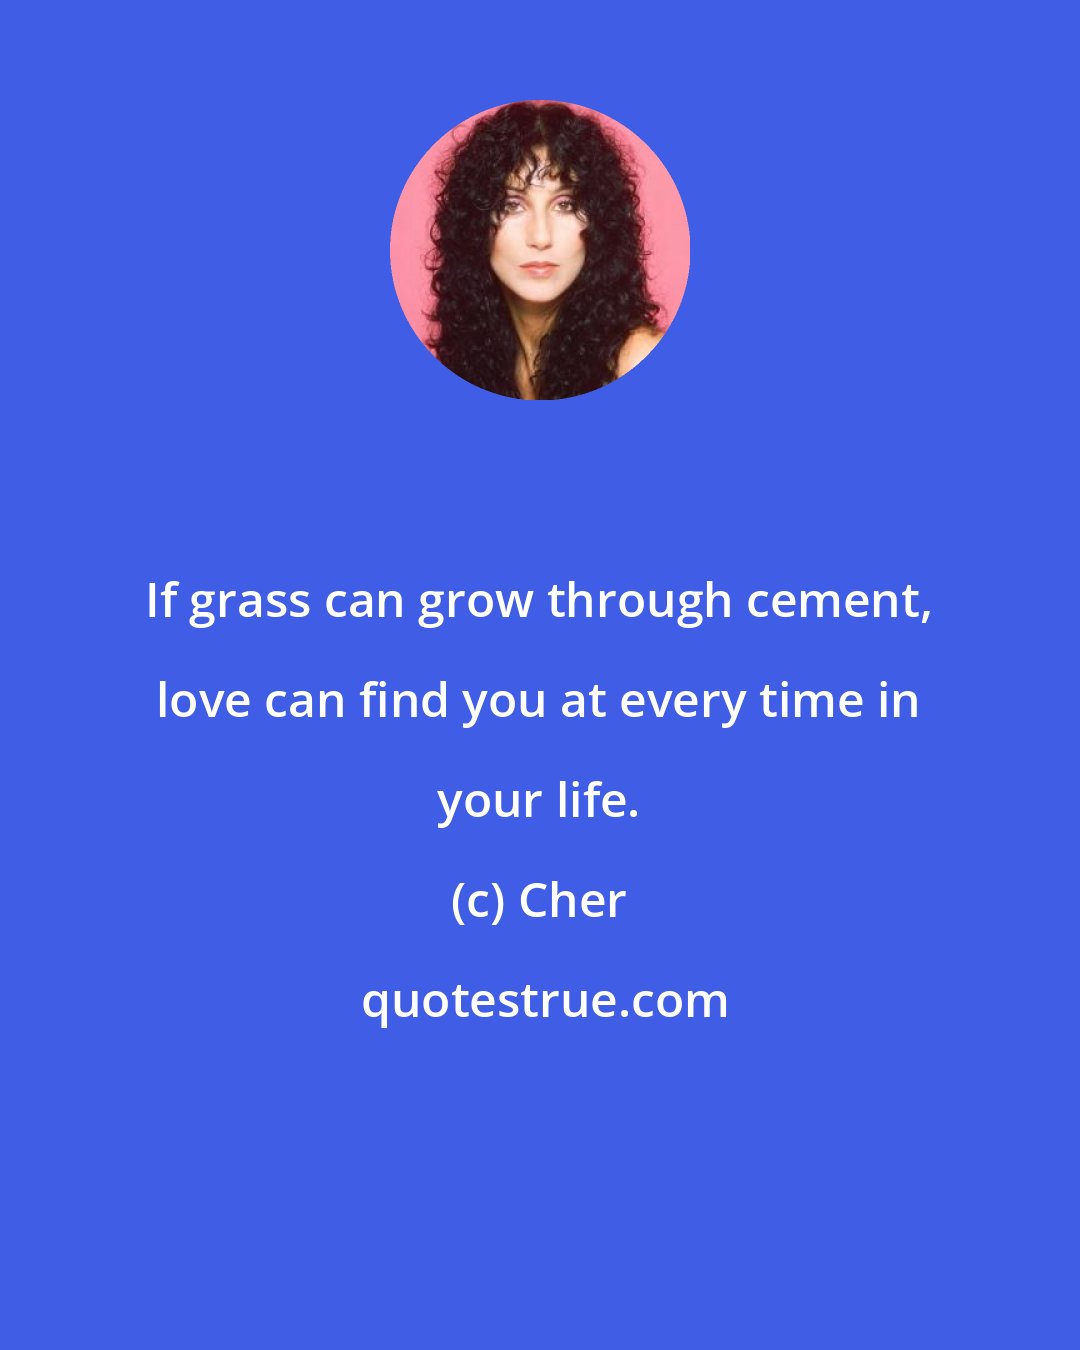 Cher: If grass can grow through cement, love can find you at every time in your life.